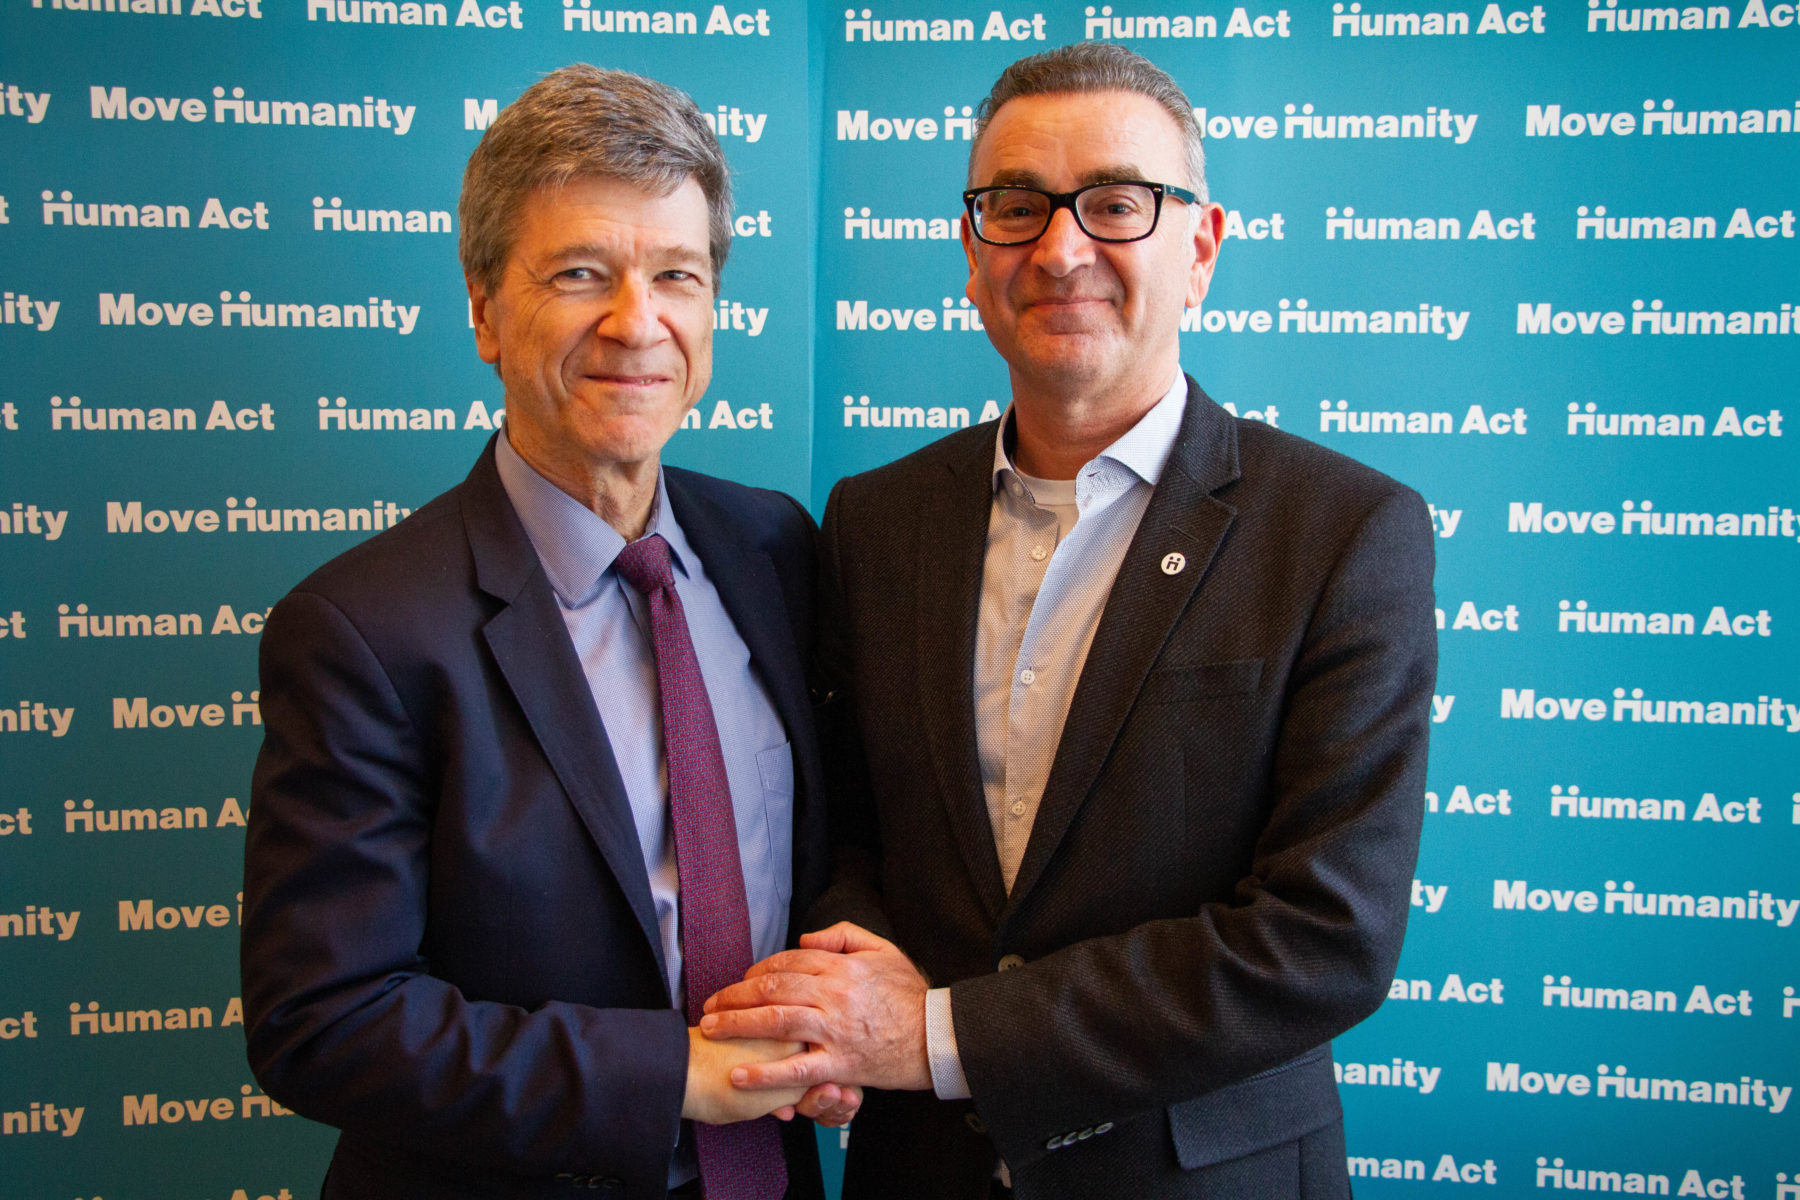 Djaffar meets Jeffery Sachs at the launch of Move Humanity